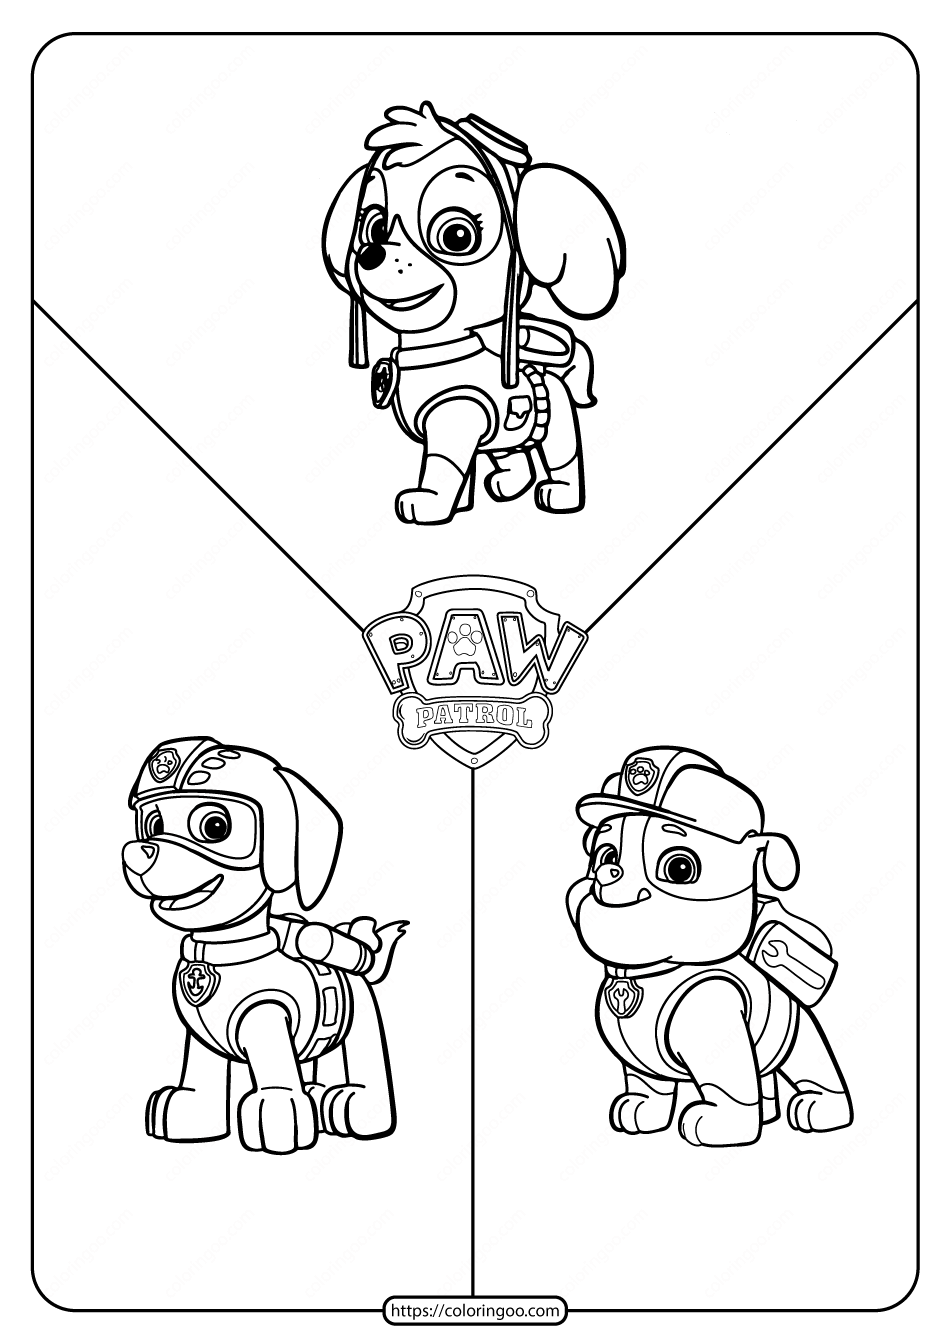 Printable paw patrol friends coloring pages in paw patrol coloring paw patrol coloring pages coloring pages